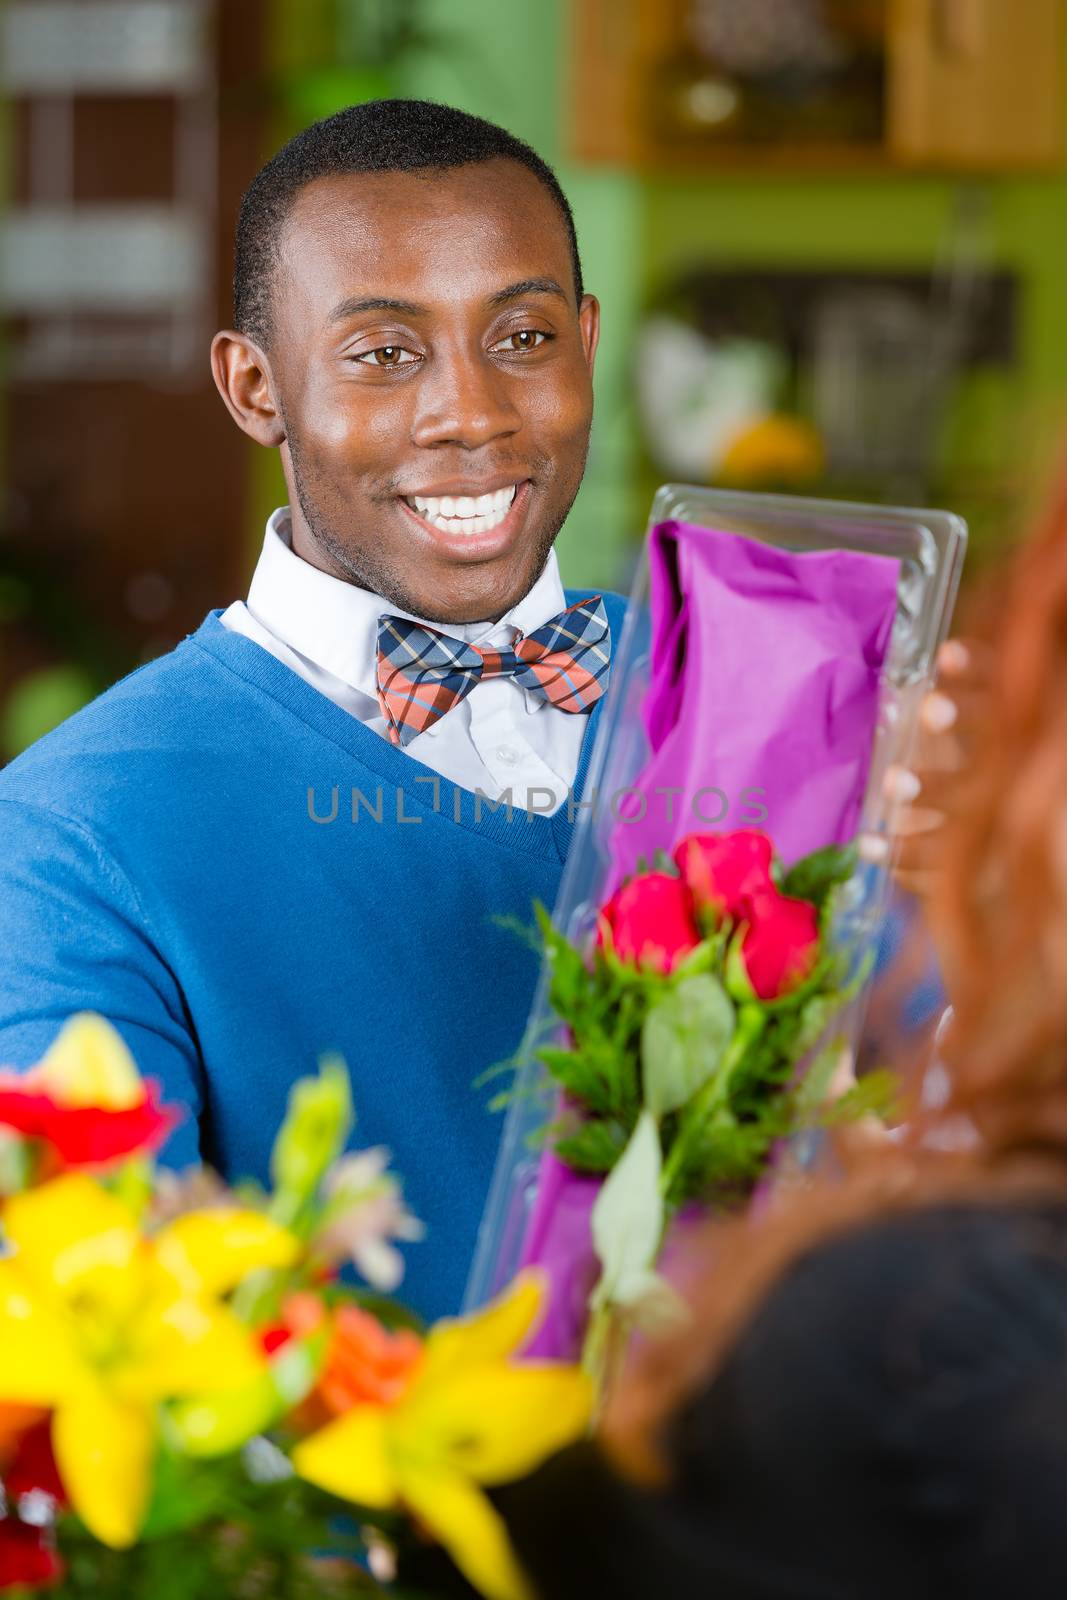 Handsome man purchasing roses at a florist shop